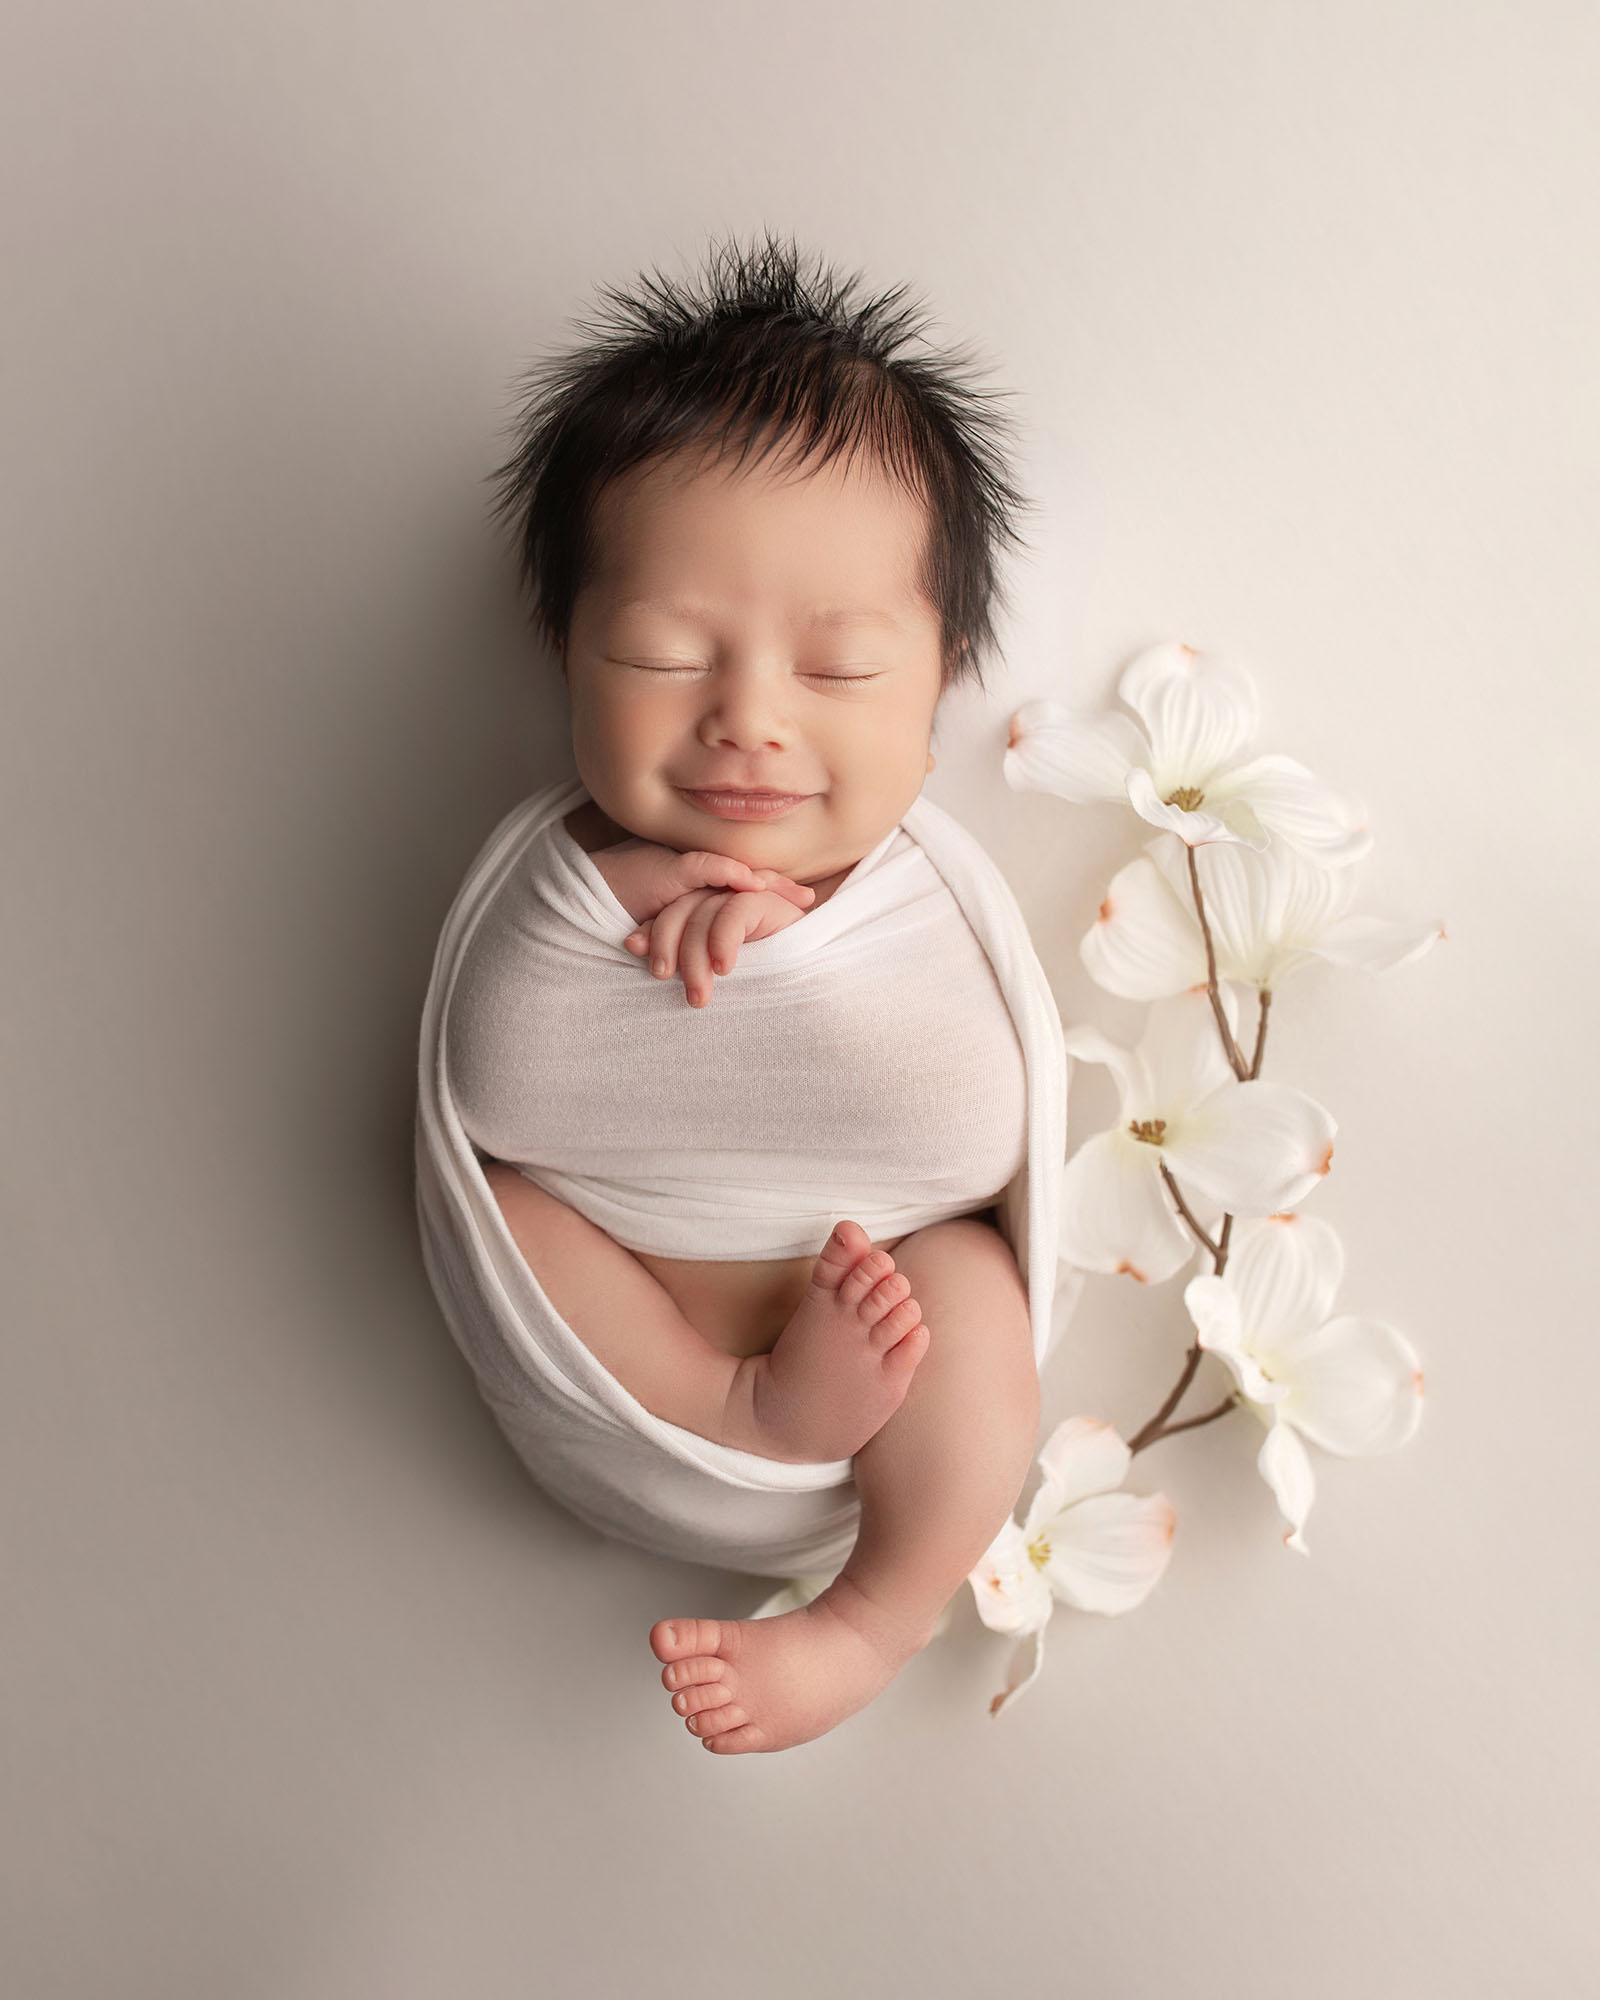 Newborn baby smiling and is in a white wrap.